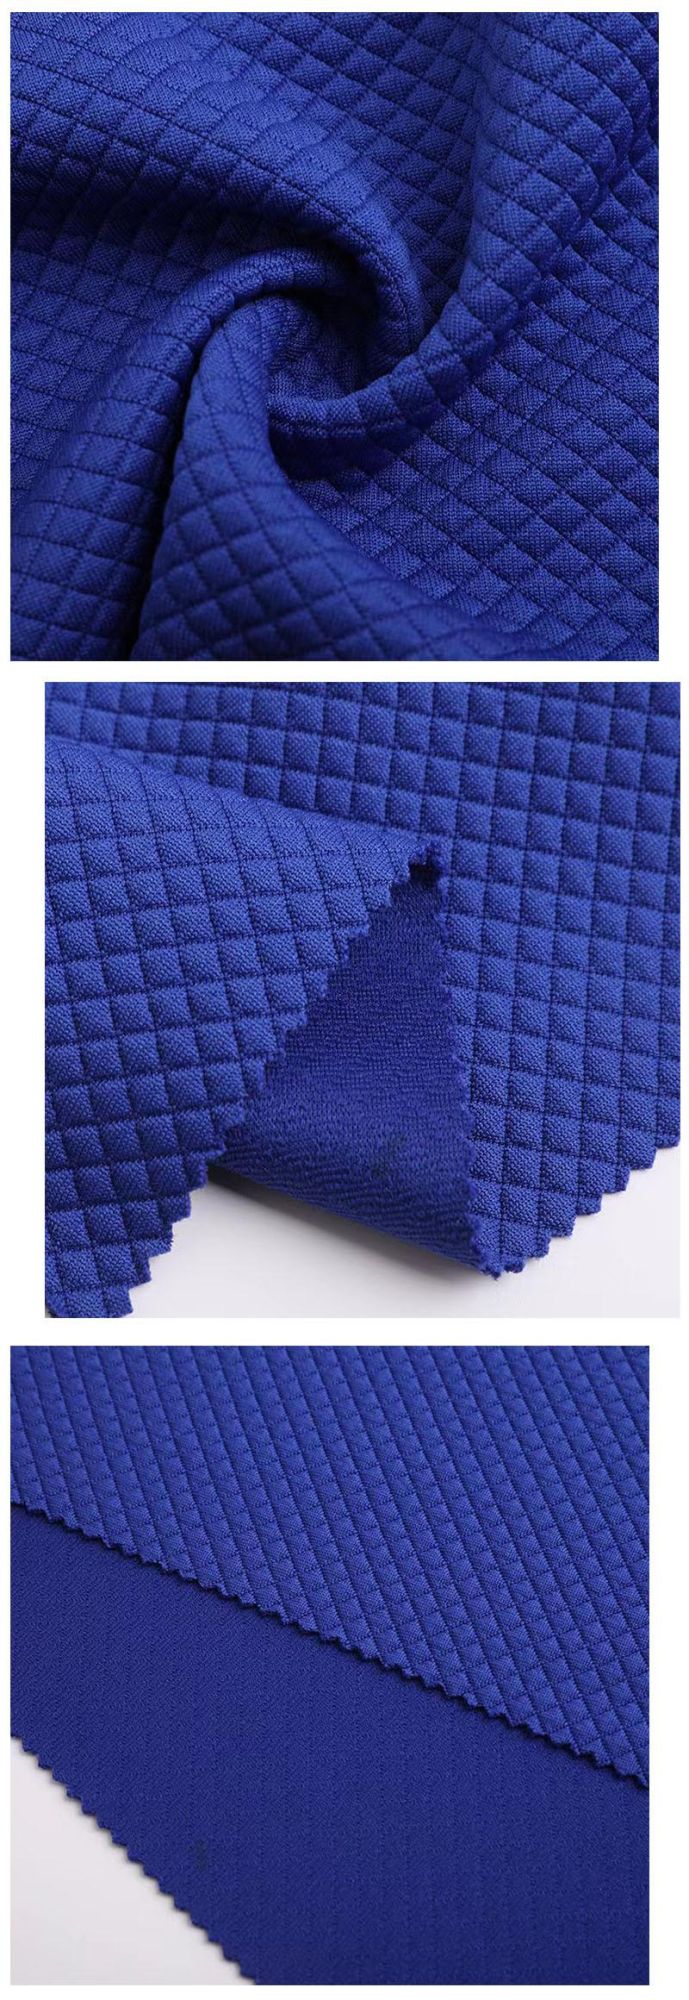 Knitted Jacquard Polyester and Spandex Textile Dying Fabric Clothing Sofa Blanket Fabric